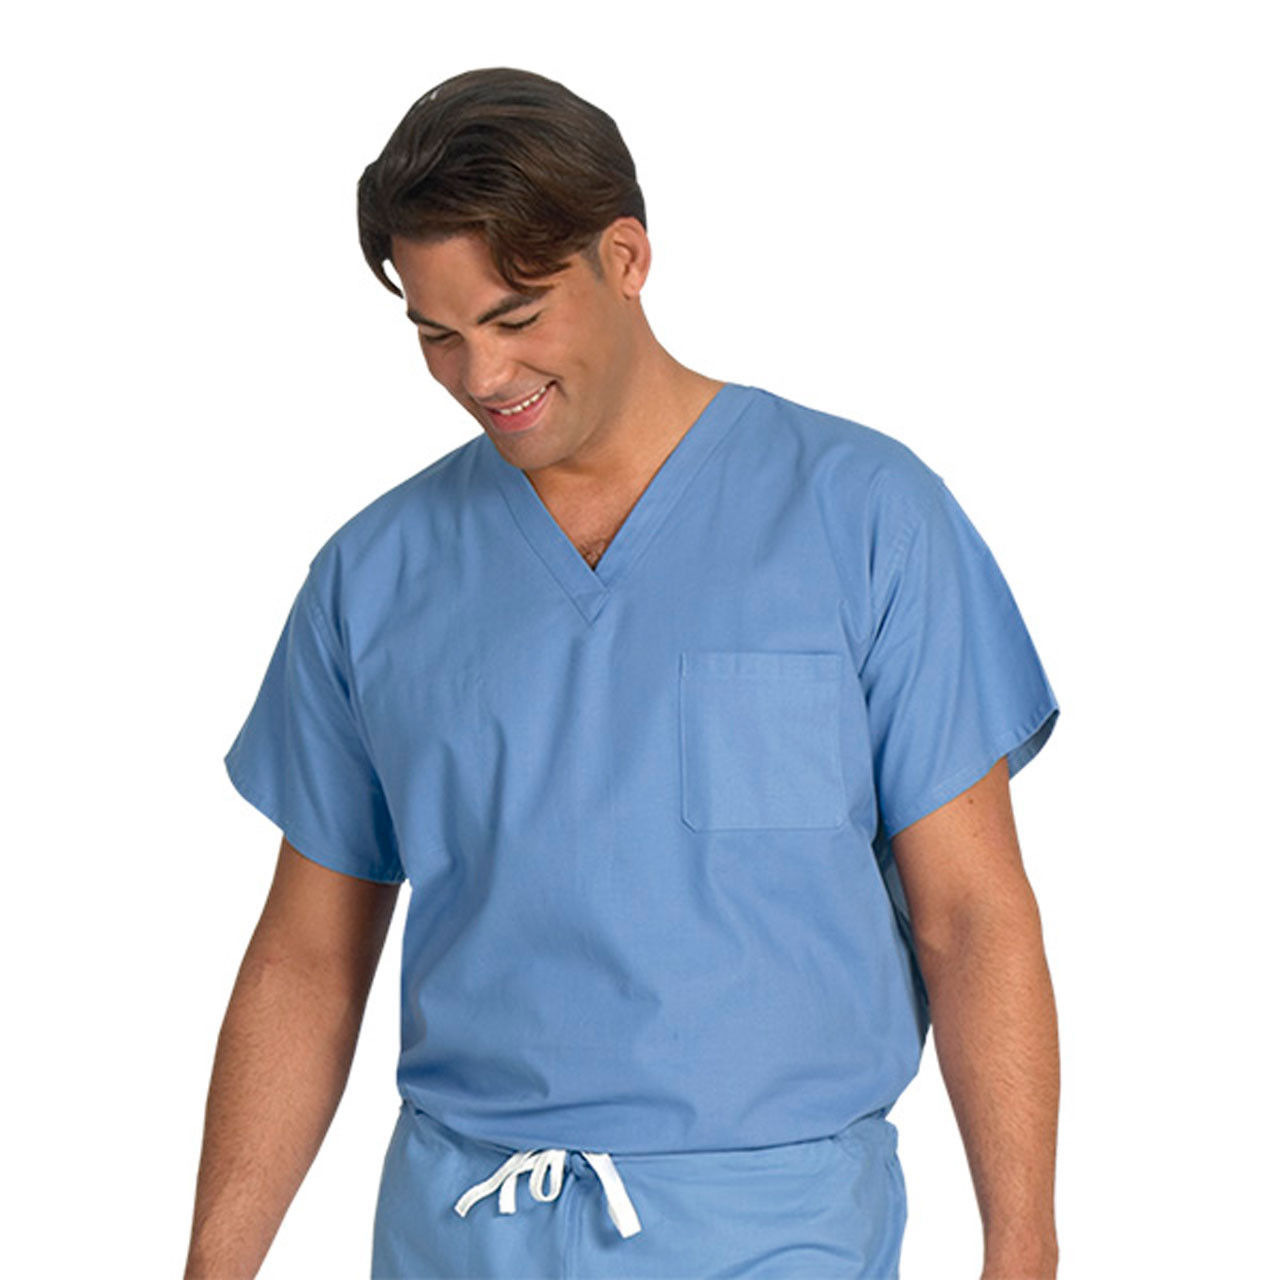 Are these scrub sets reversible?